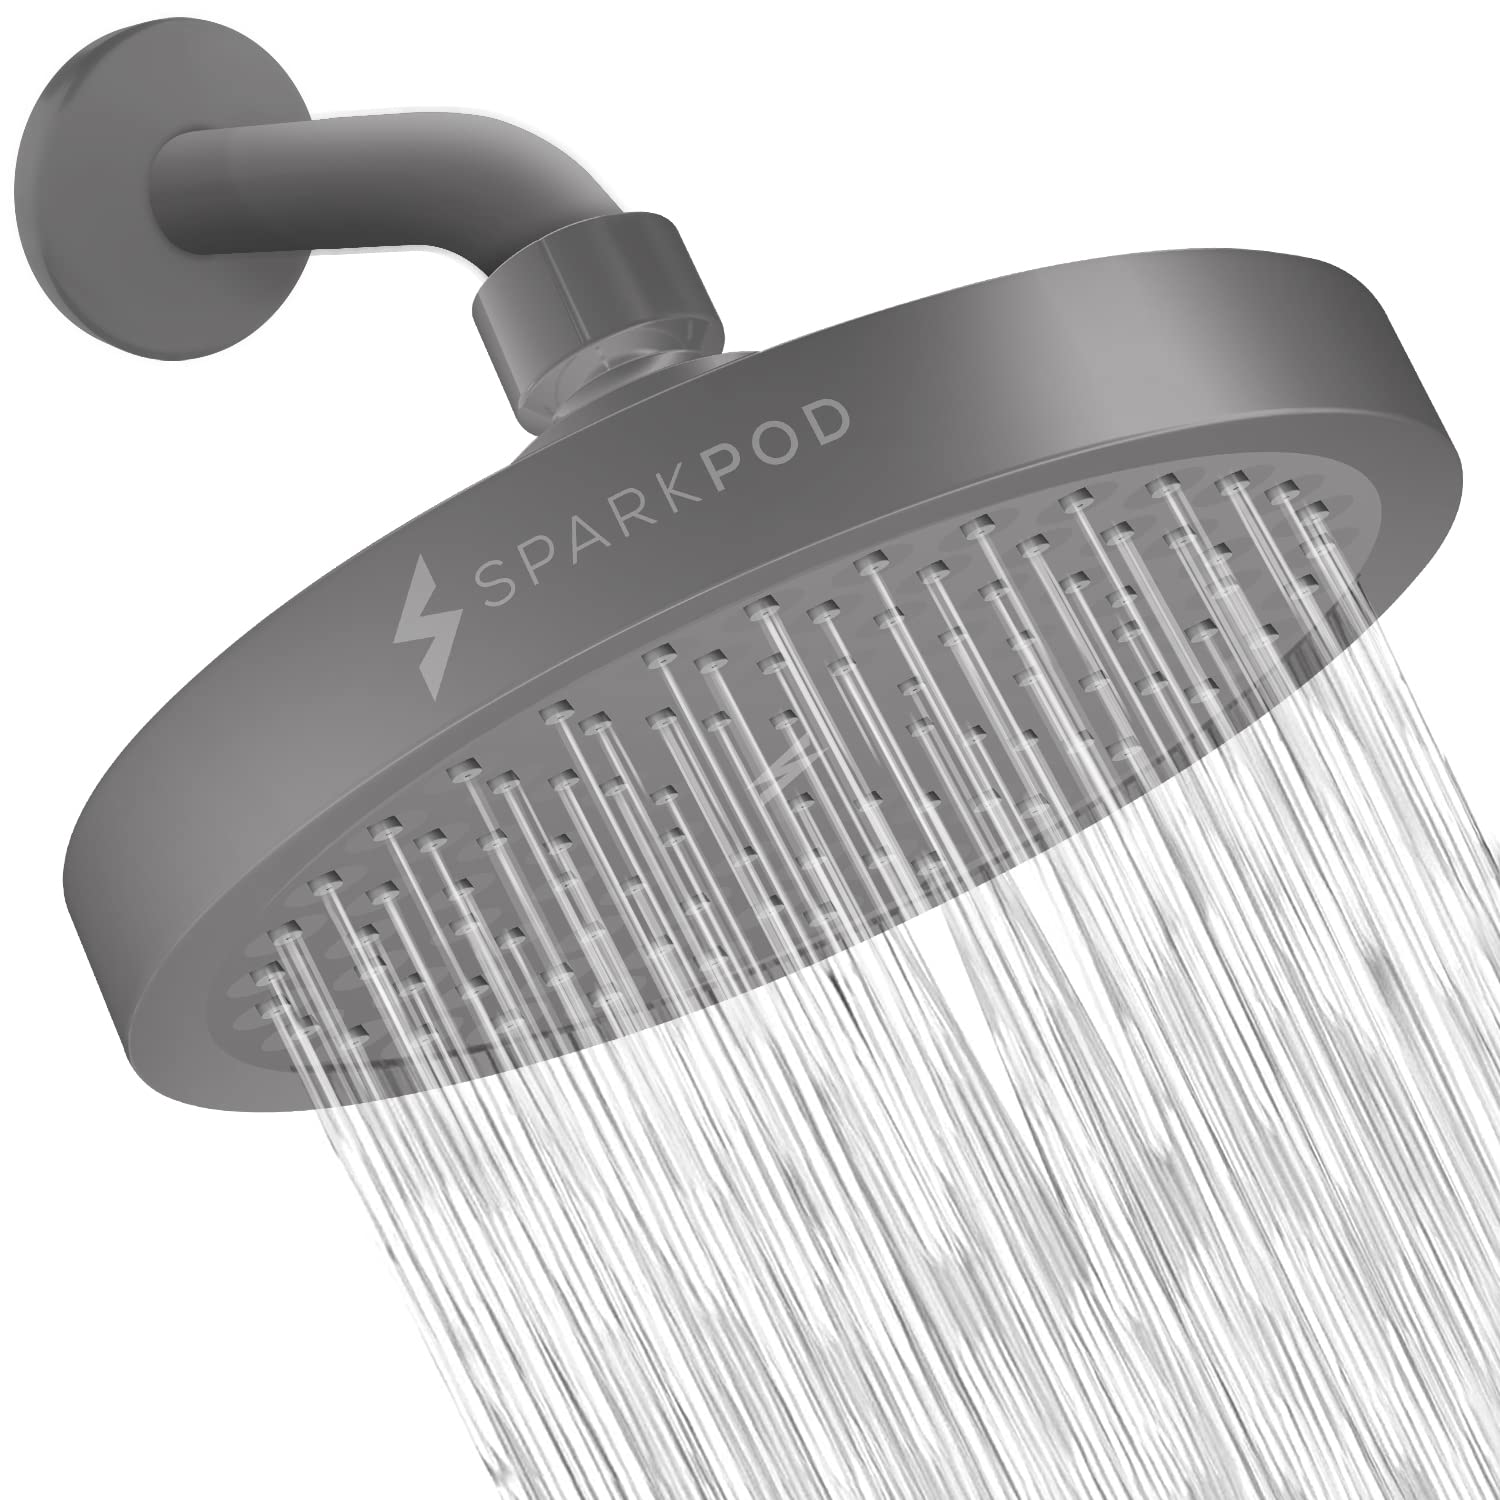 SparkPod Shower Head - High Pressure Rain - Premium Quality Luxury Design -  1-Min Install - Easy clean Adjustable Replacement fo